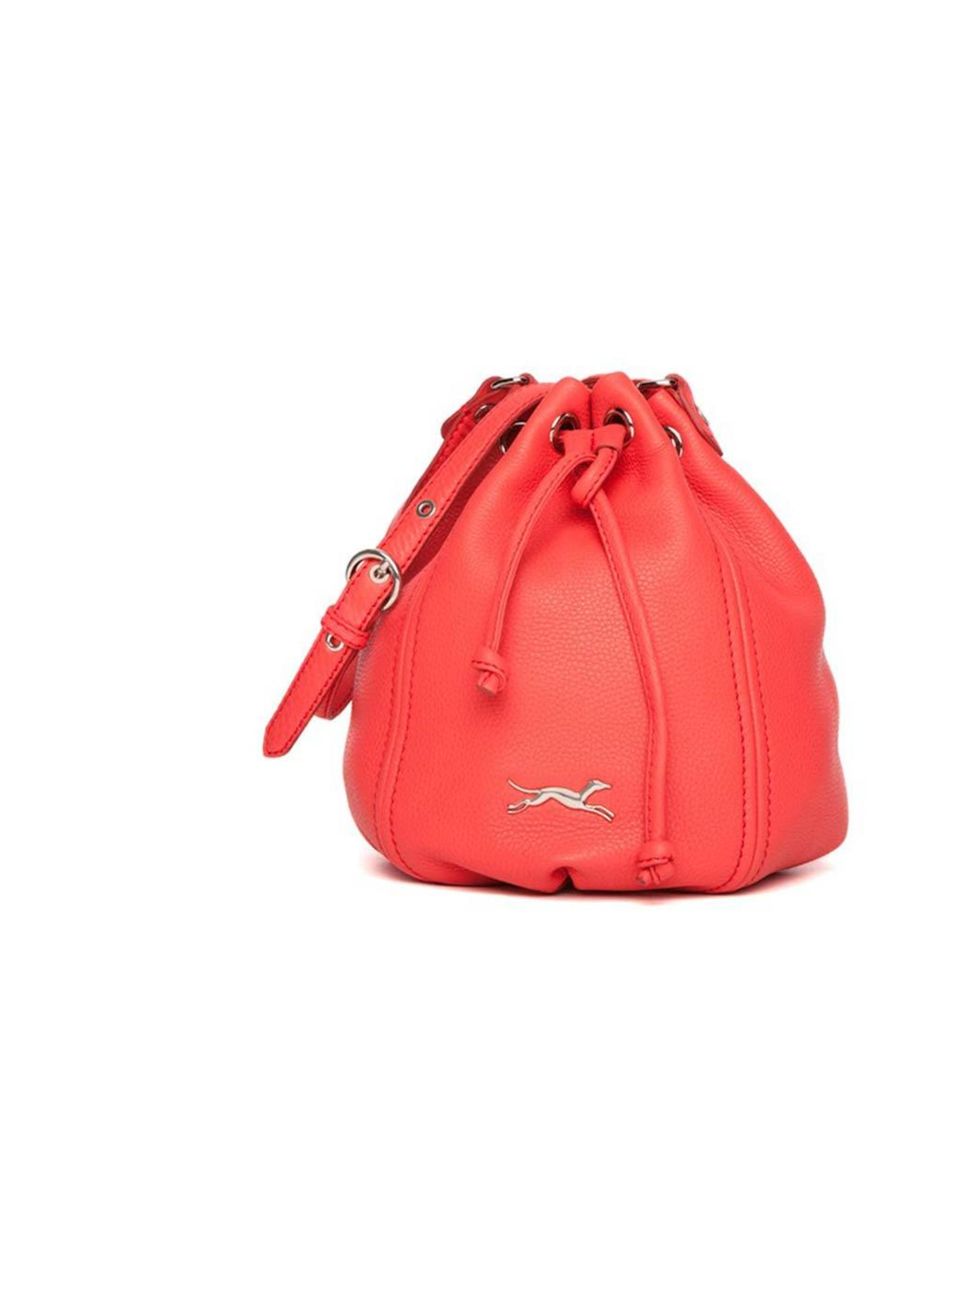 <p>This eye-wateringly bright coral bag will add a much-needed pop of colour to wintery wardrobes, and the sporty bucket design makes it a must-have <a href="http://www.bimbaylola.com/shoponline/product.php?id_product=6659&id_category=304">Bimba & Lola</